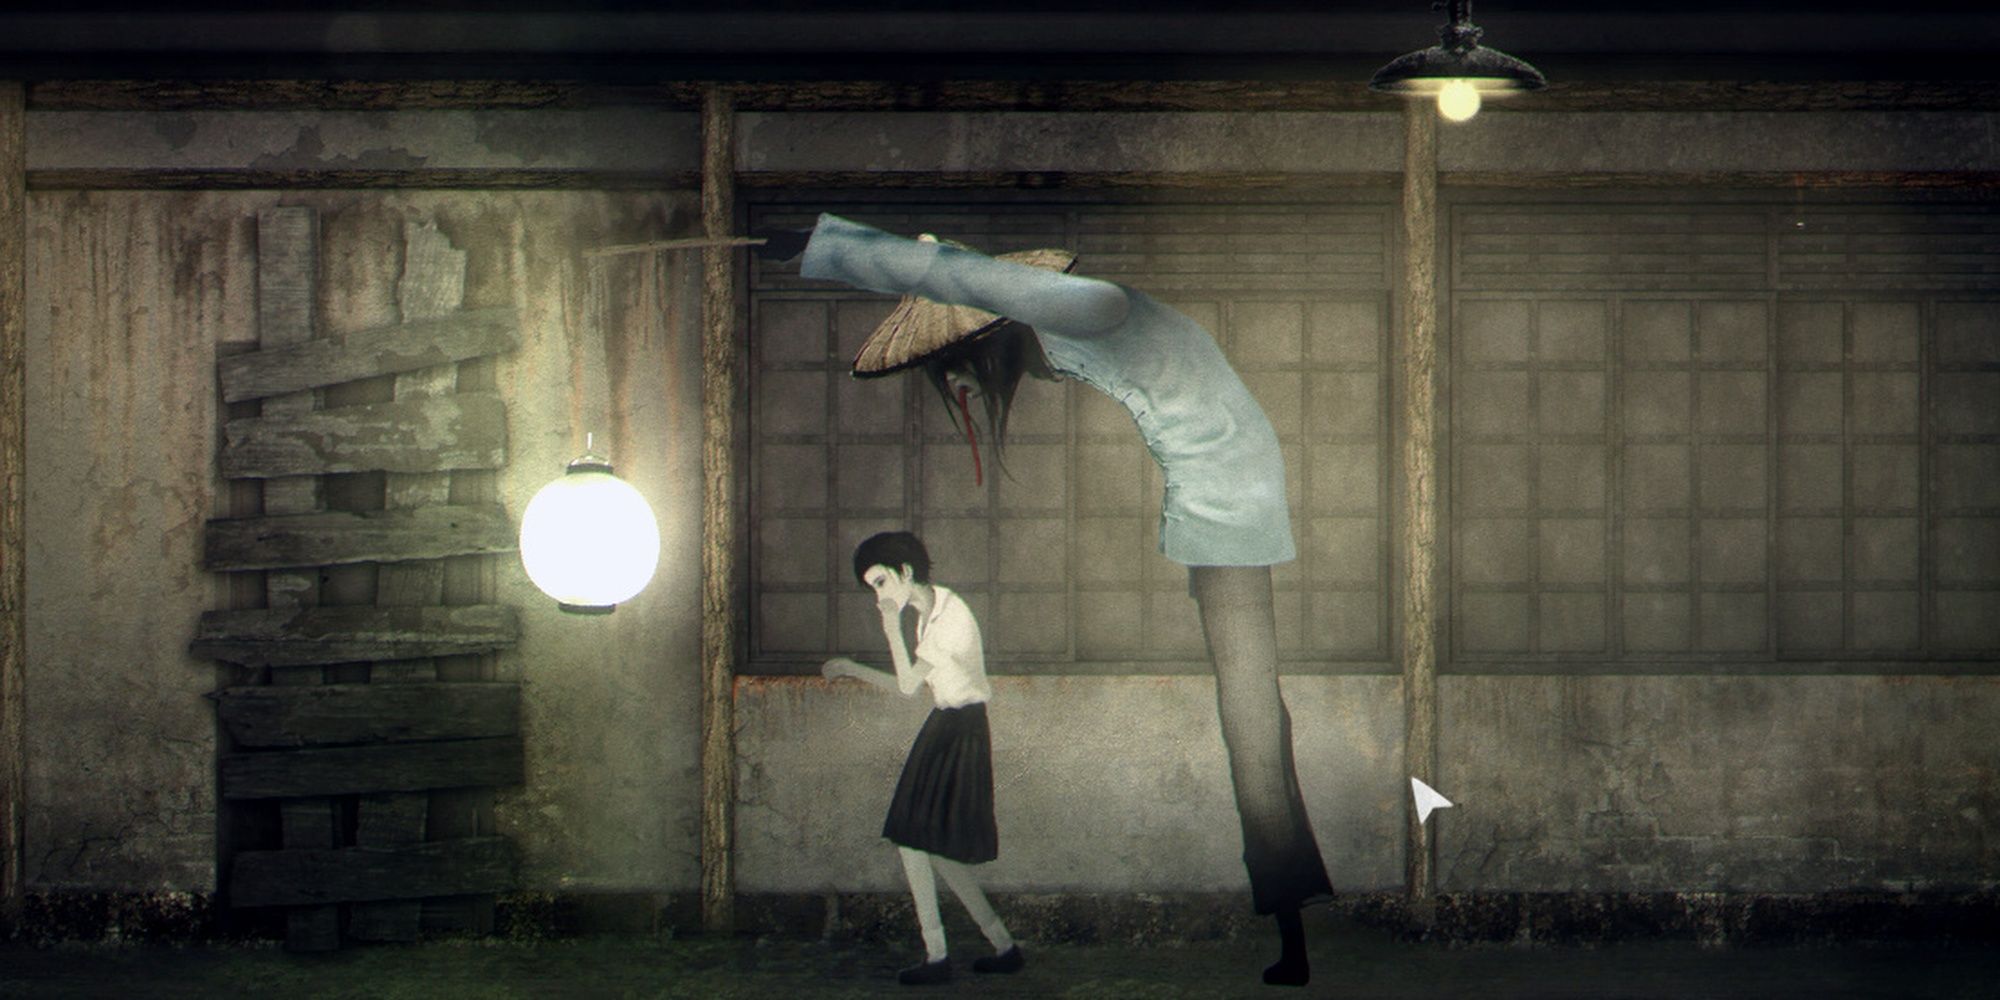 Detention: Sequence Involving A Ghost Chasing The Protagonist